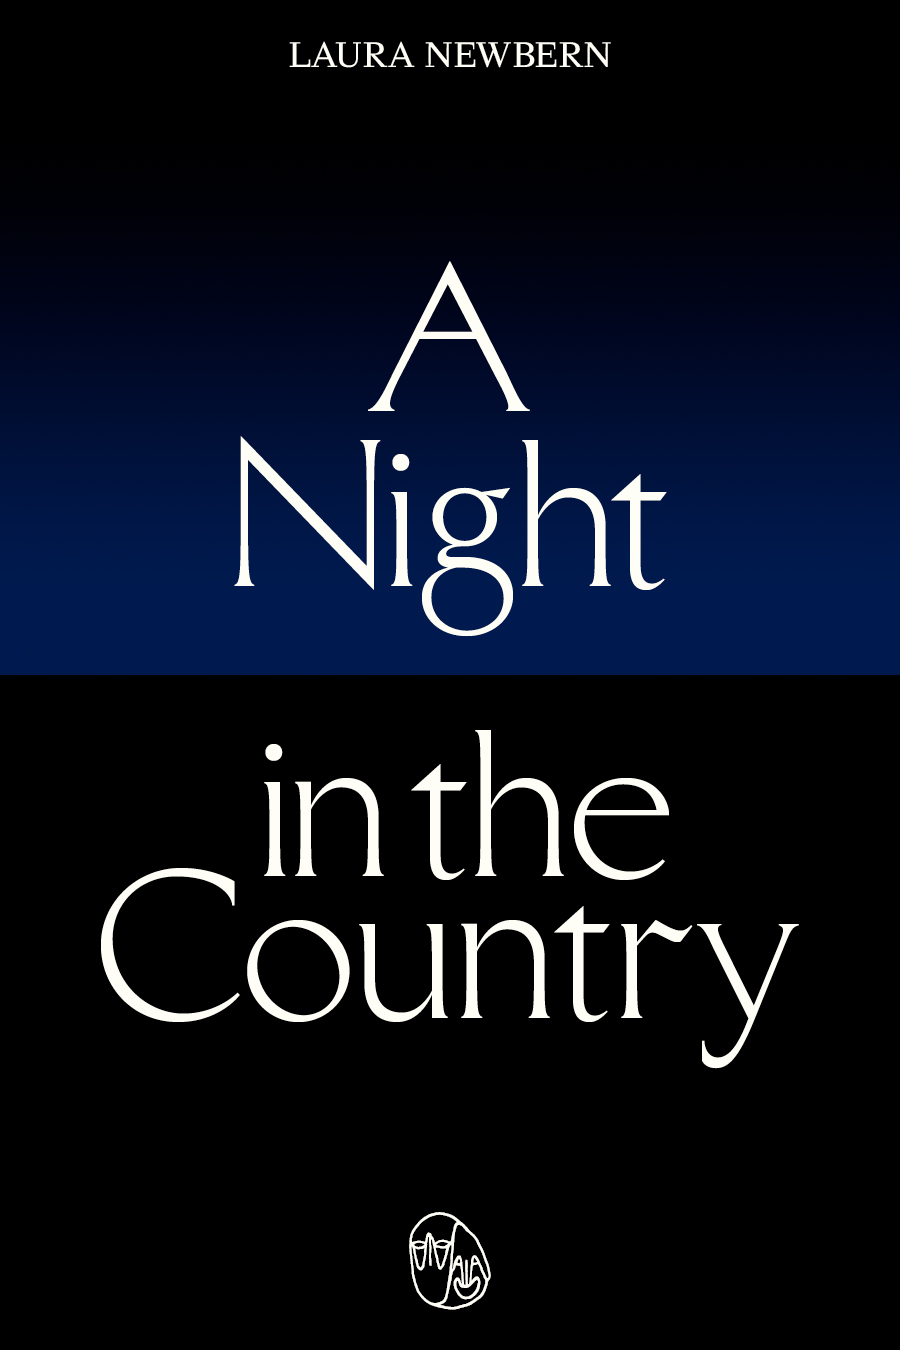 Laura Newbern, A Night in the Country